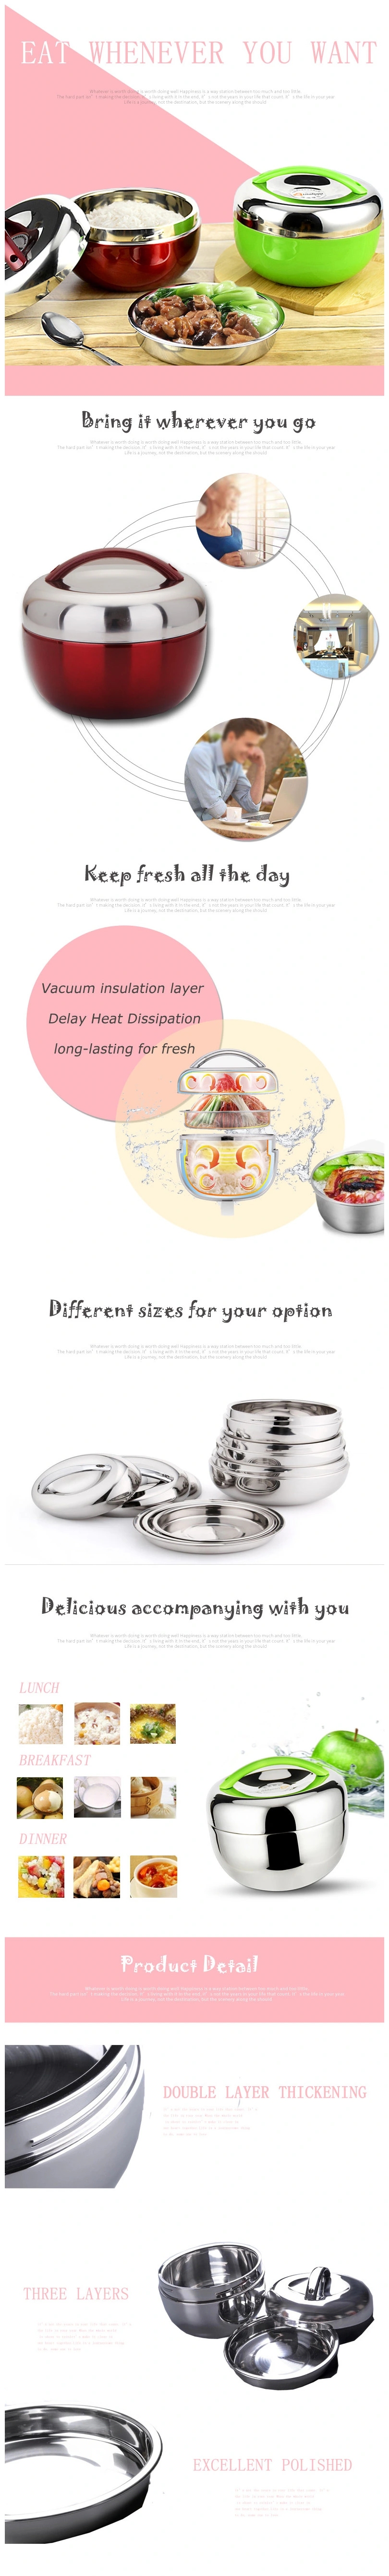 a-Variety-of-Styles-Stainless-Steel-Bowl-304-Make-Your-Life-More-Heathy-and-Make-You-Feel-More-S.jpg